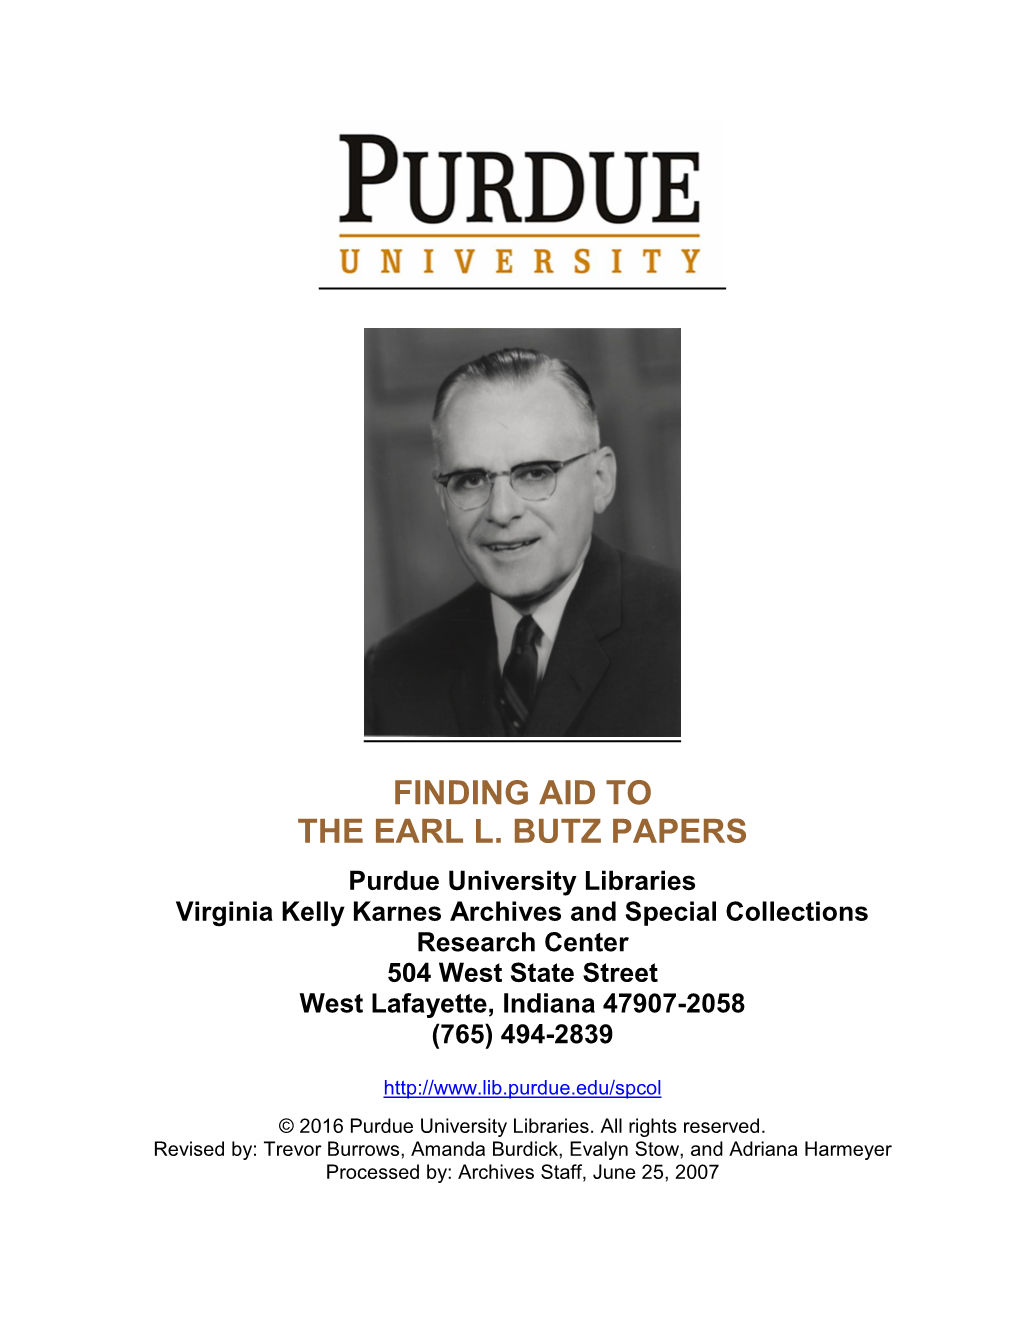 Finding Aid to the Earl L. Butz Papers